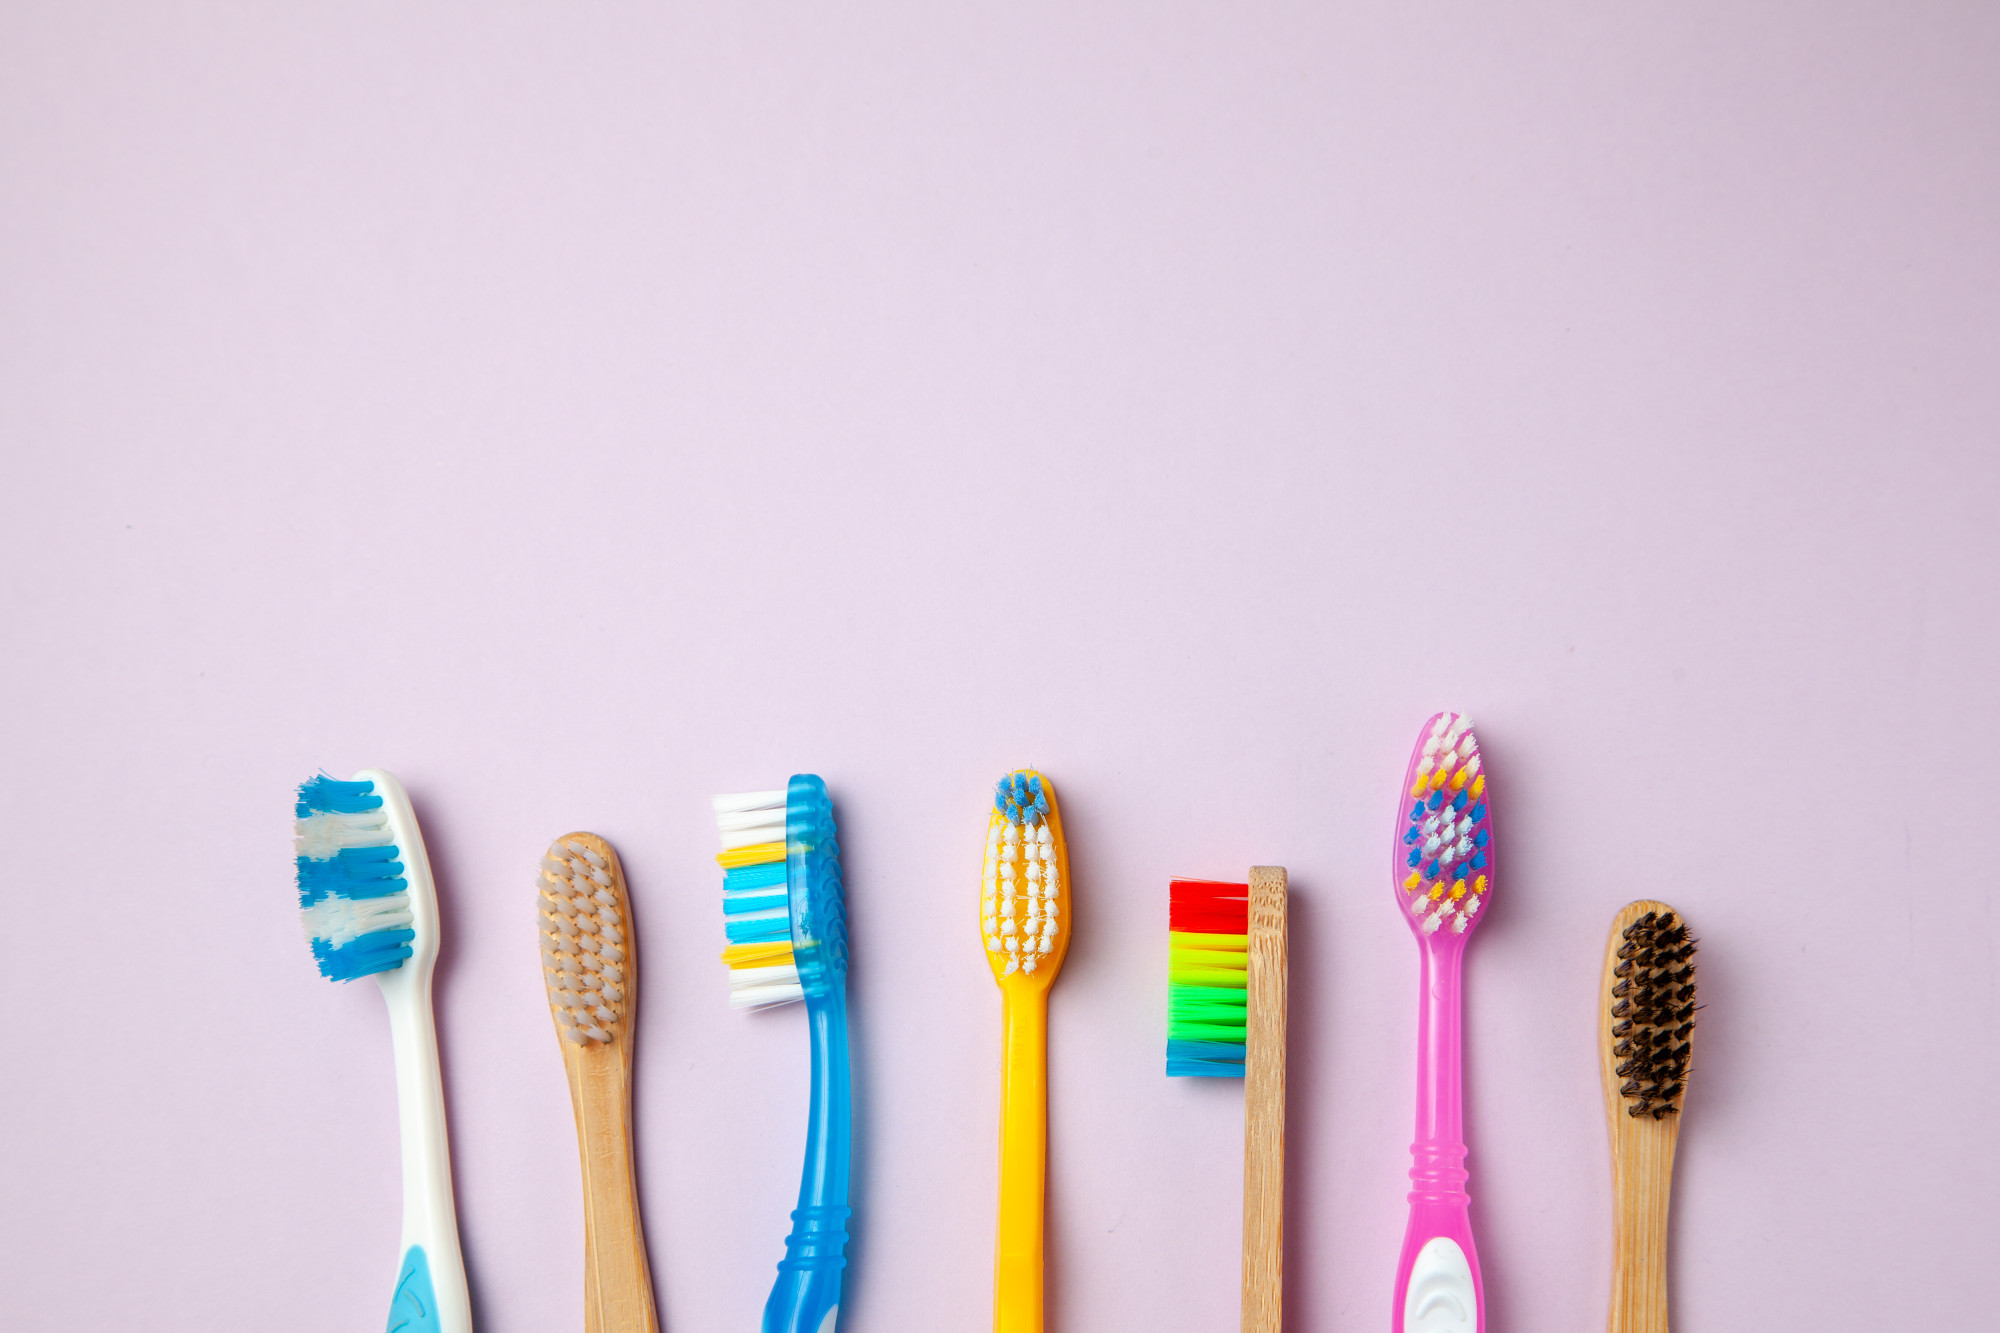 Great dental hygiene starts with picking the right toothbrush. We're revealing what the best toothbrush for kids is in this guide.